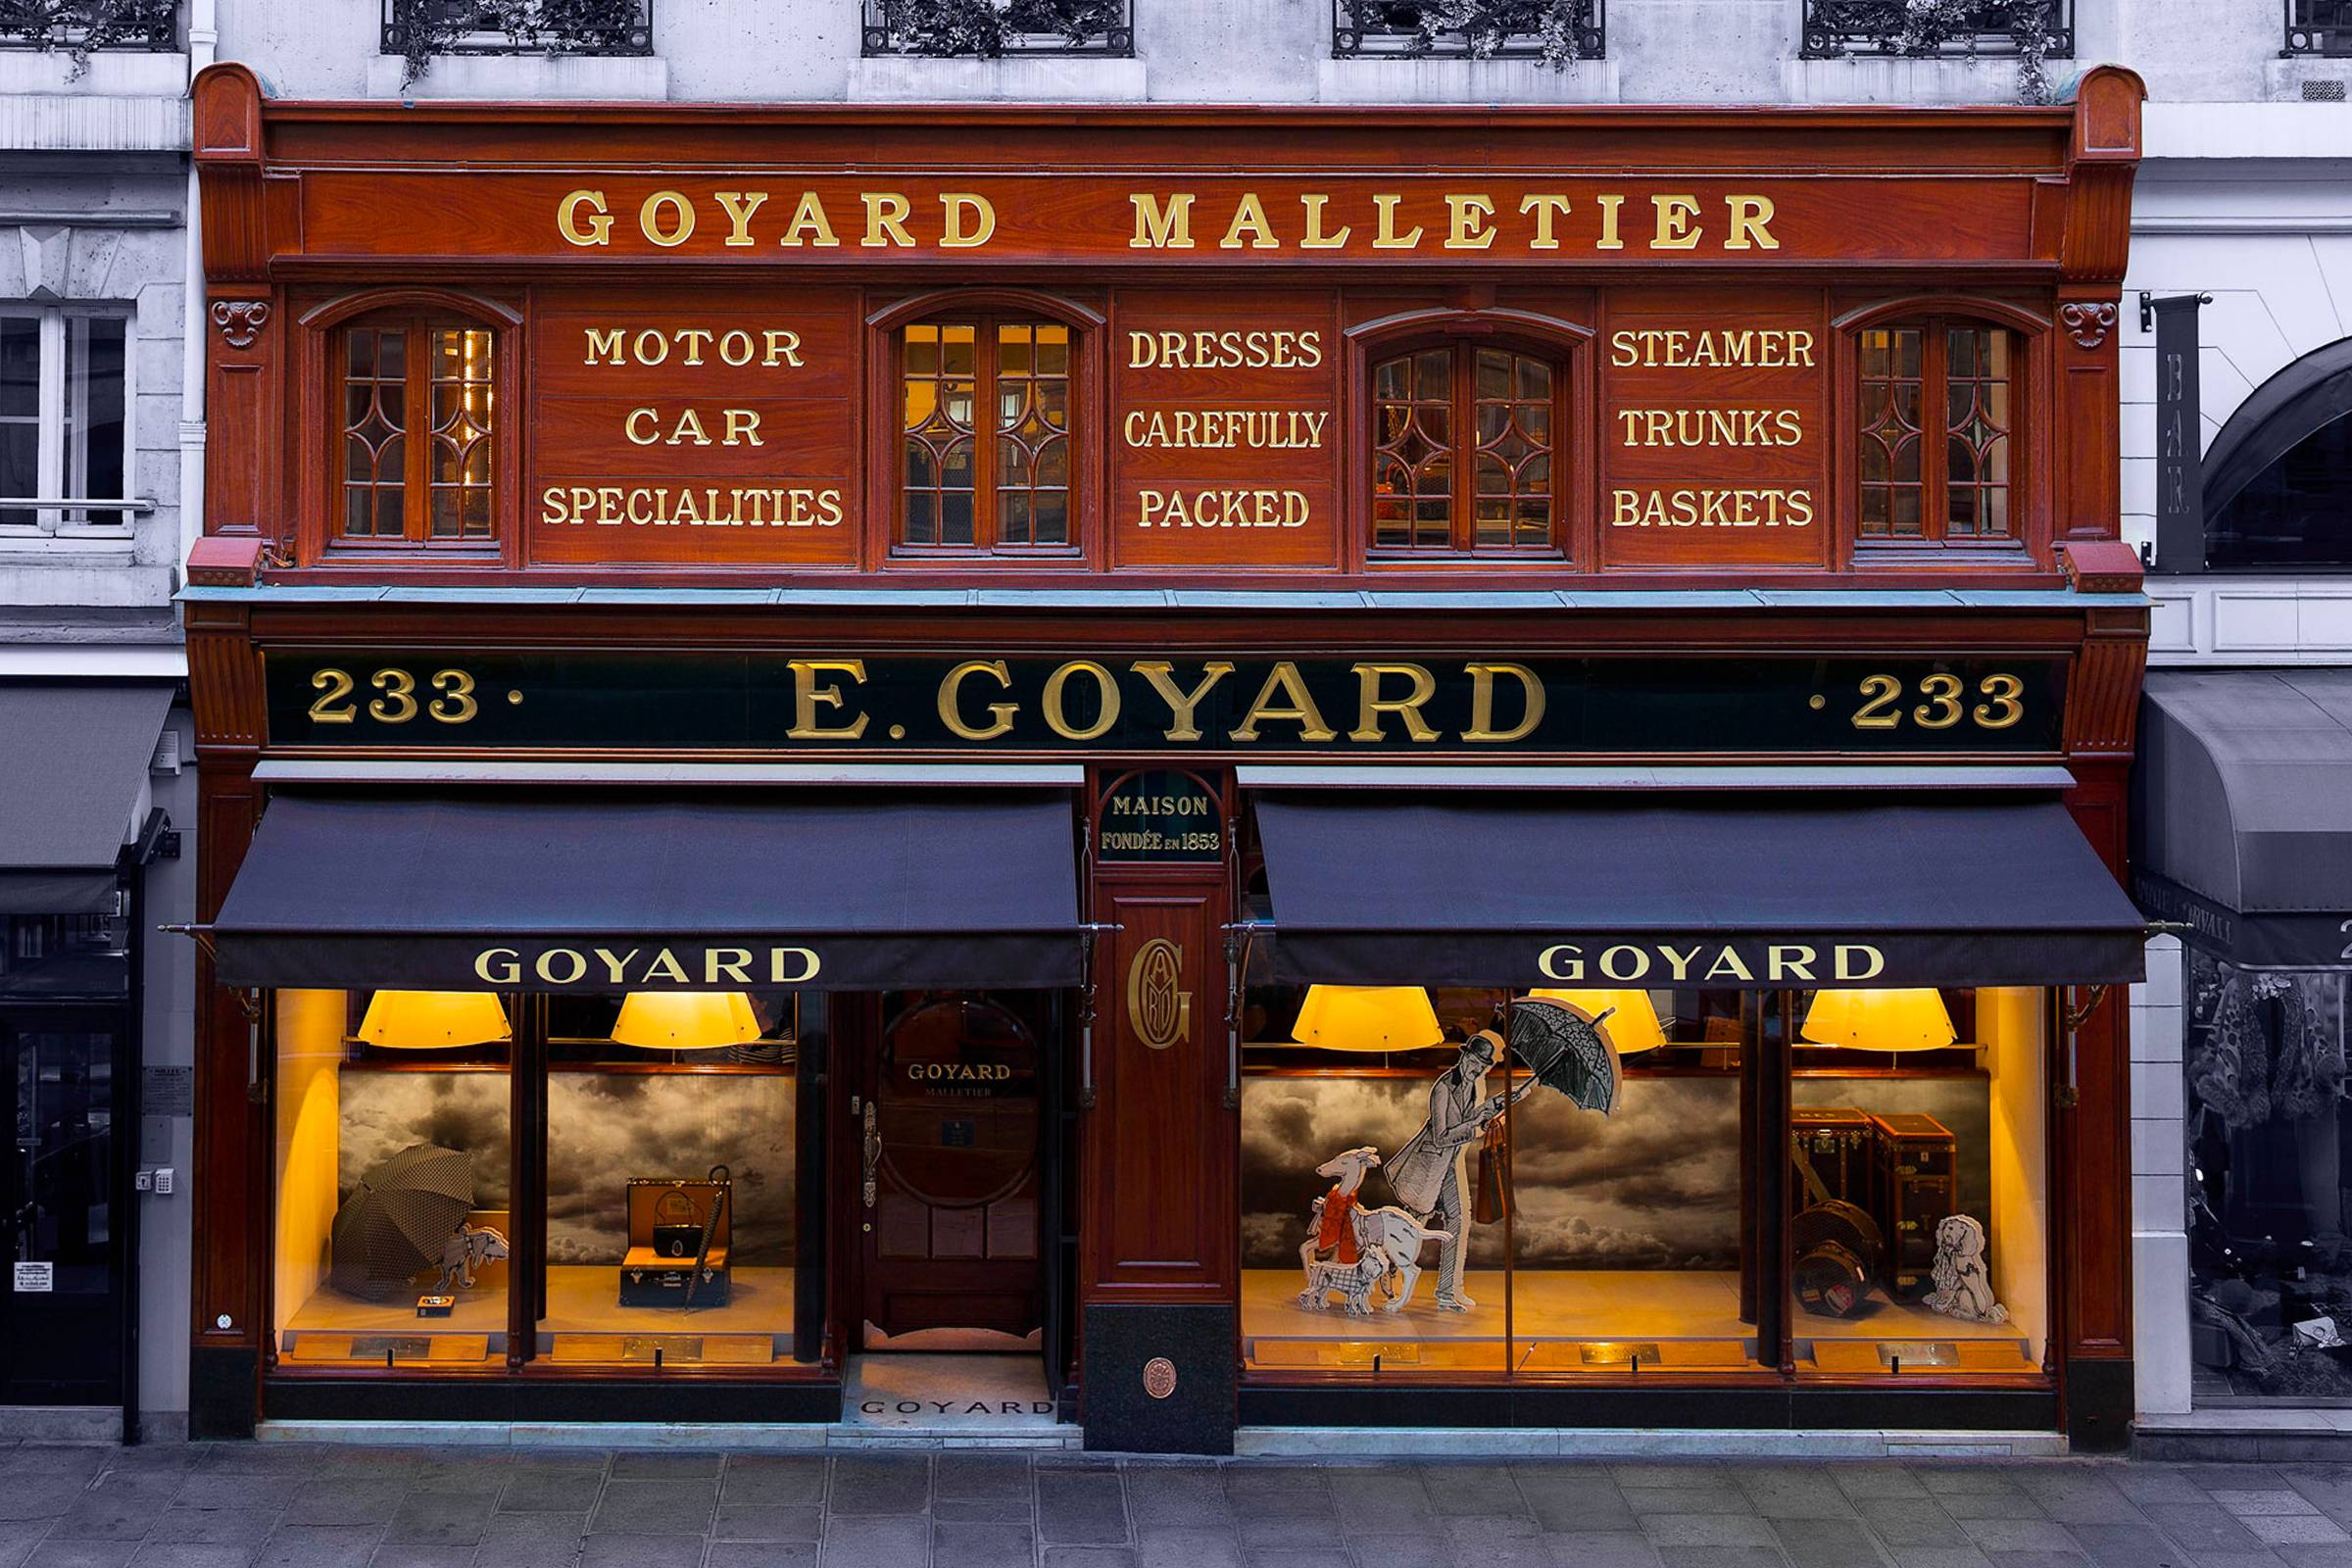 THE STORY OF GOYARD AND IT'S ICONIC BAGS